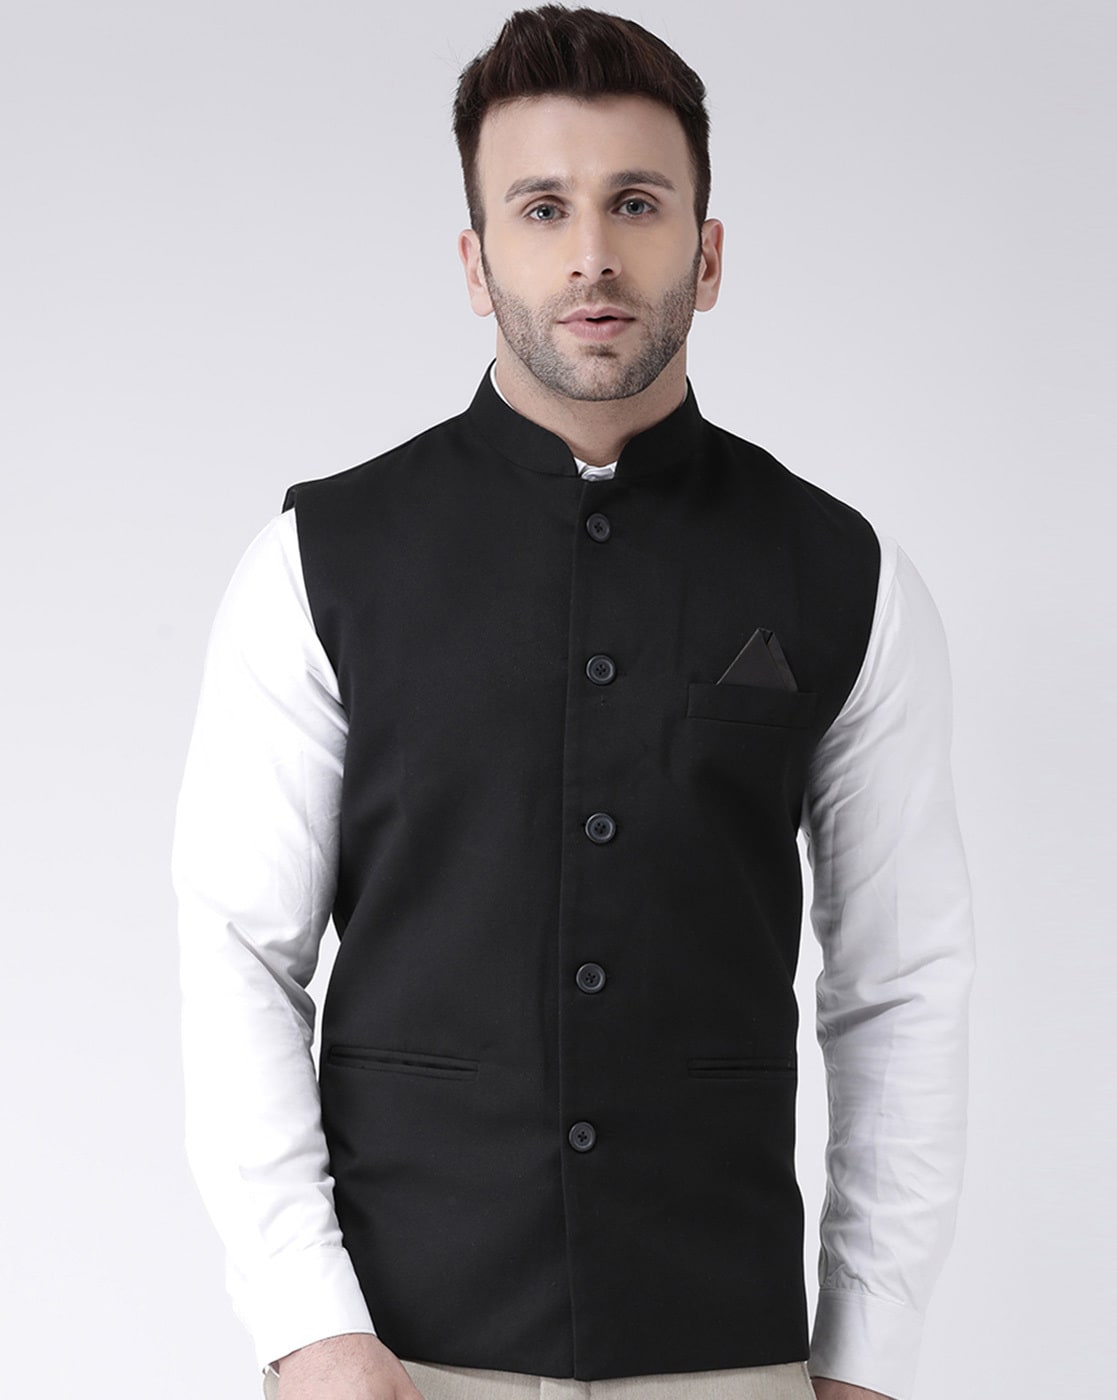 What are the best color combinations of sleeveless a Nehru jacket and a  Kurta? - Quora